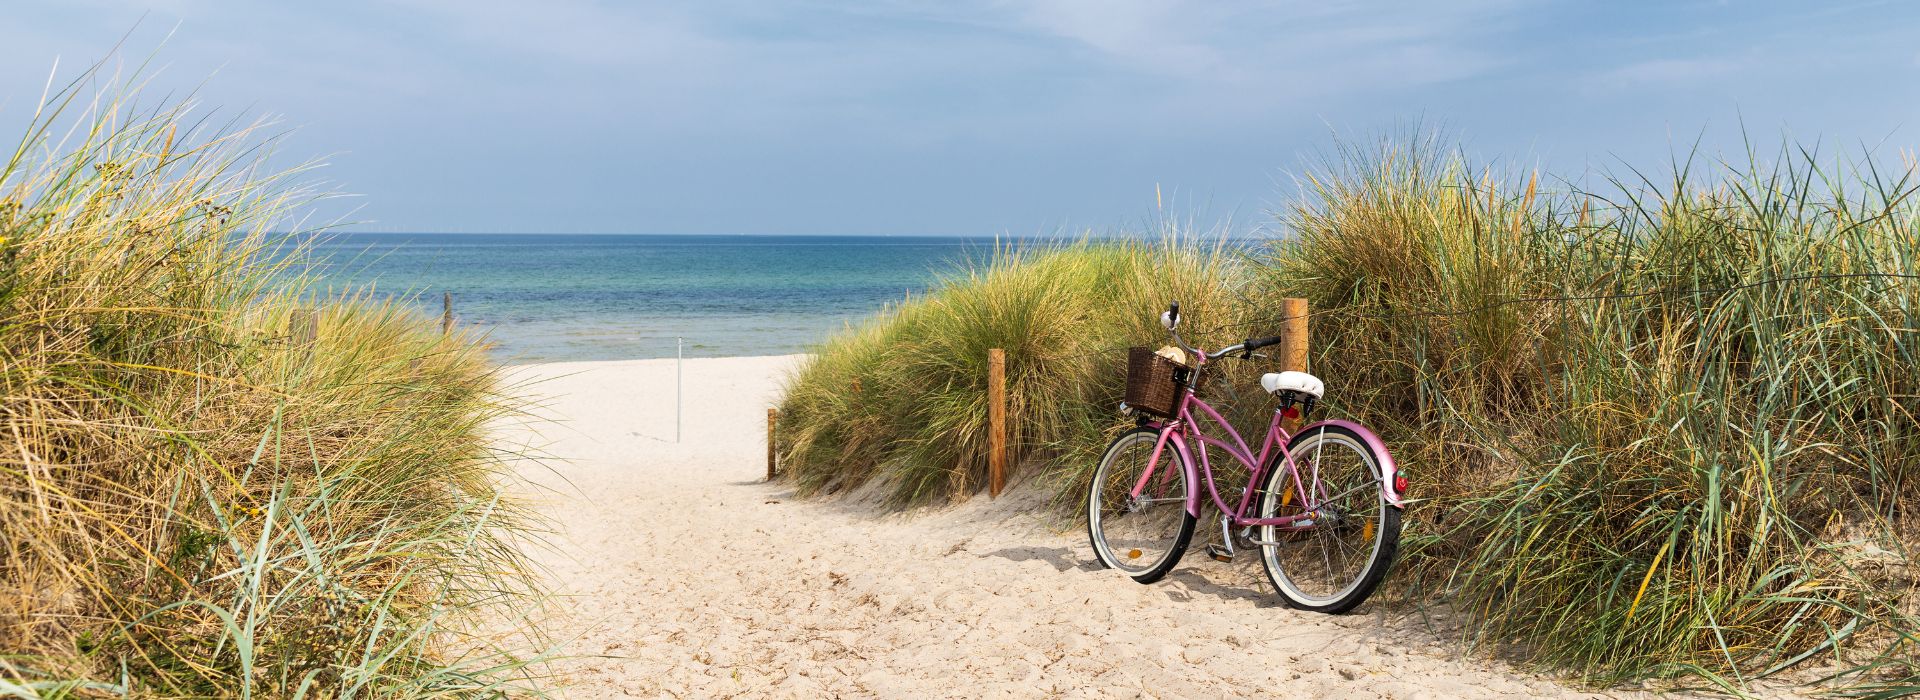 A pink bike parked at a sandy pathway to the ocean surrounded by dune grass